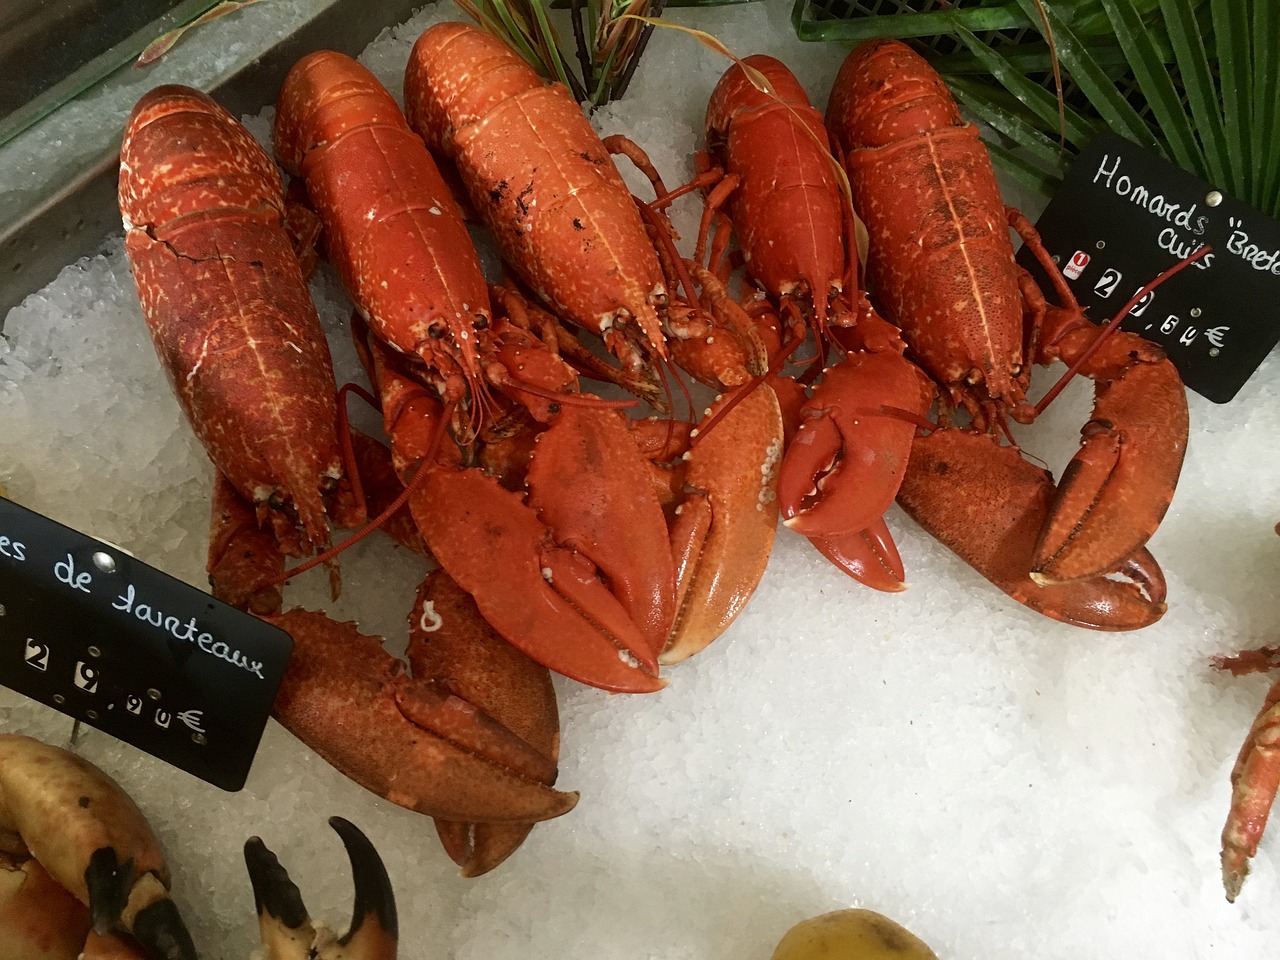 What Are Tips For Cooking Lobster From Frozen?